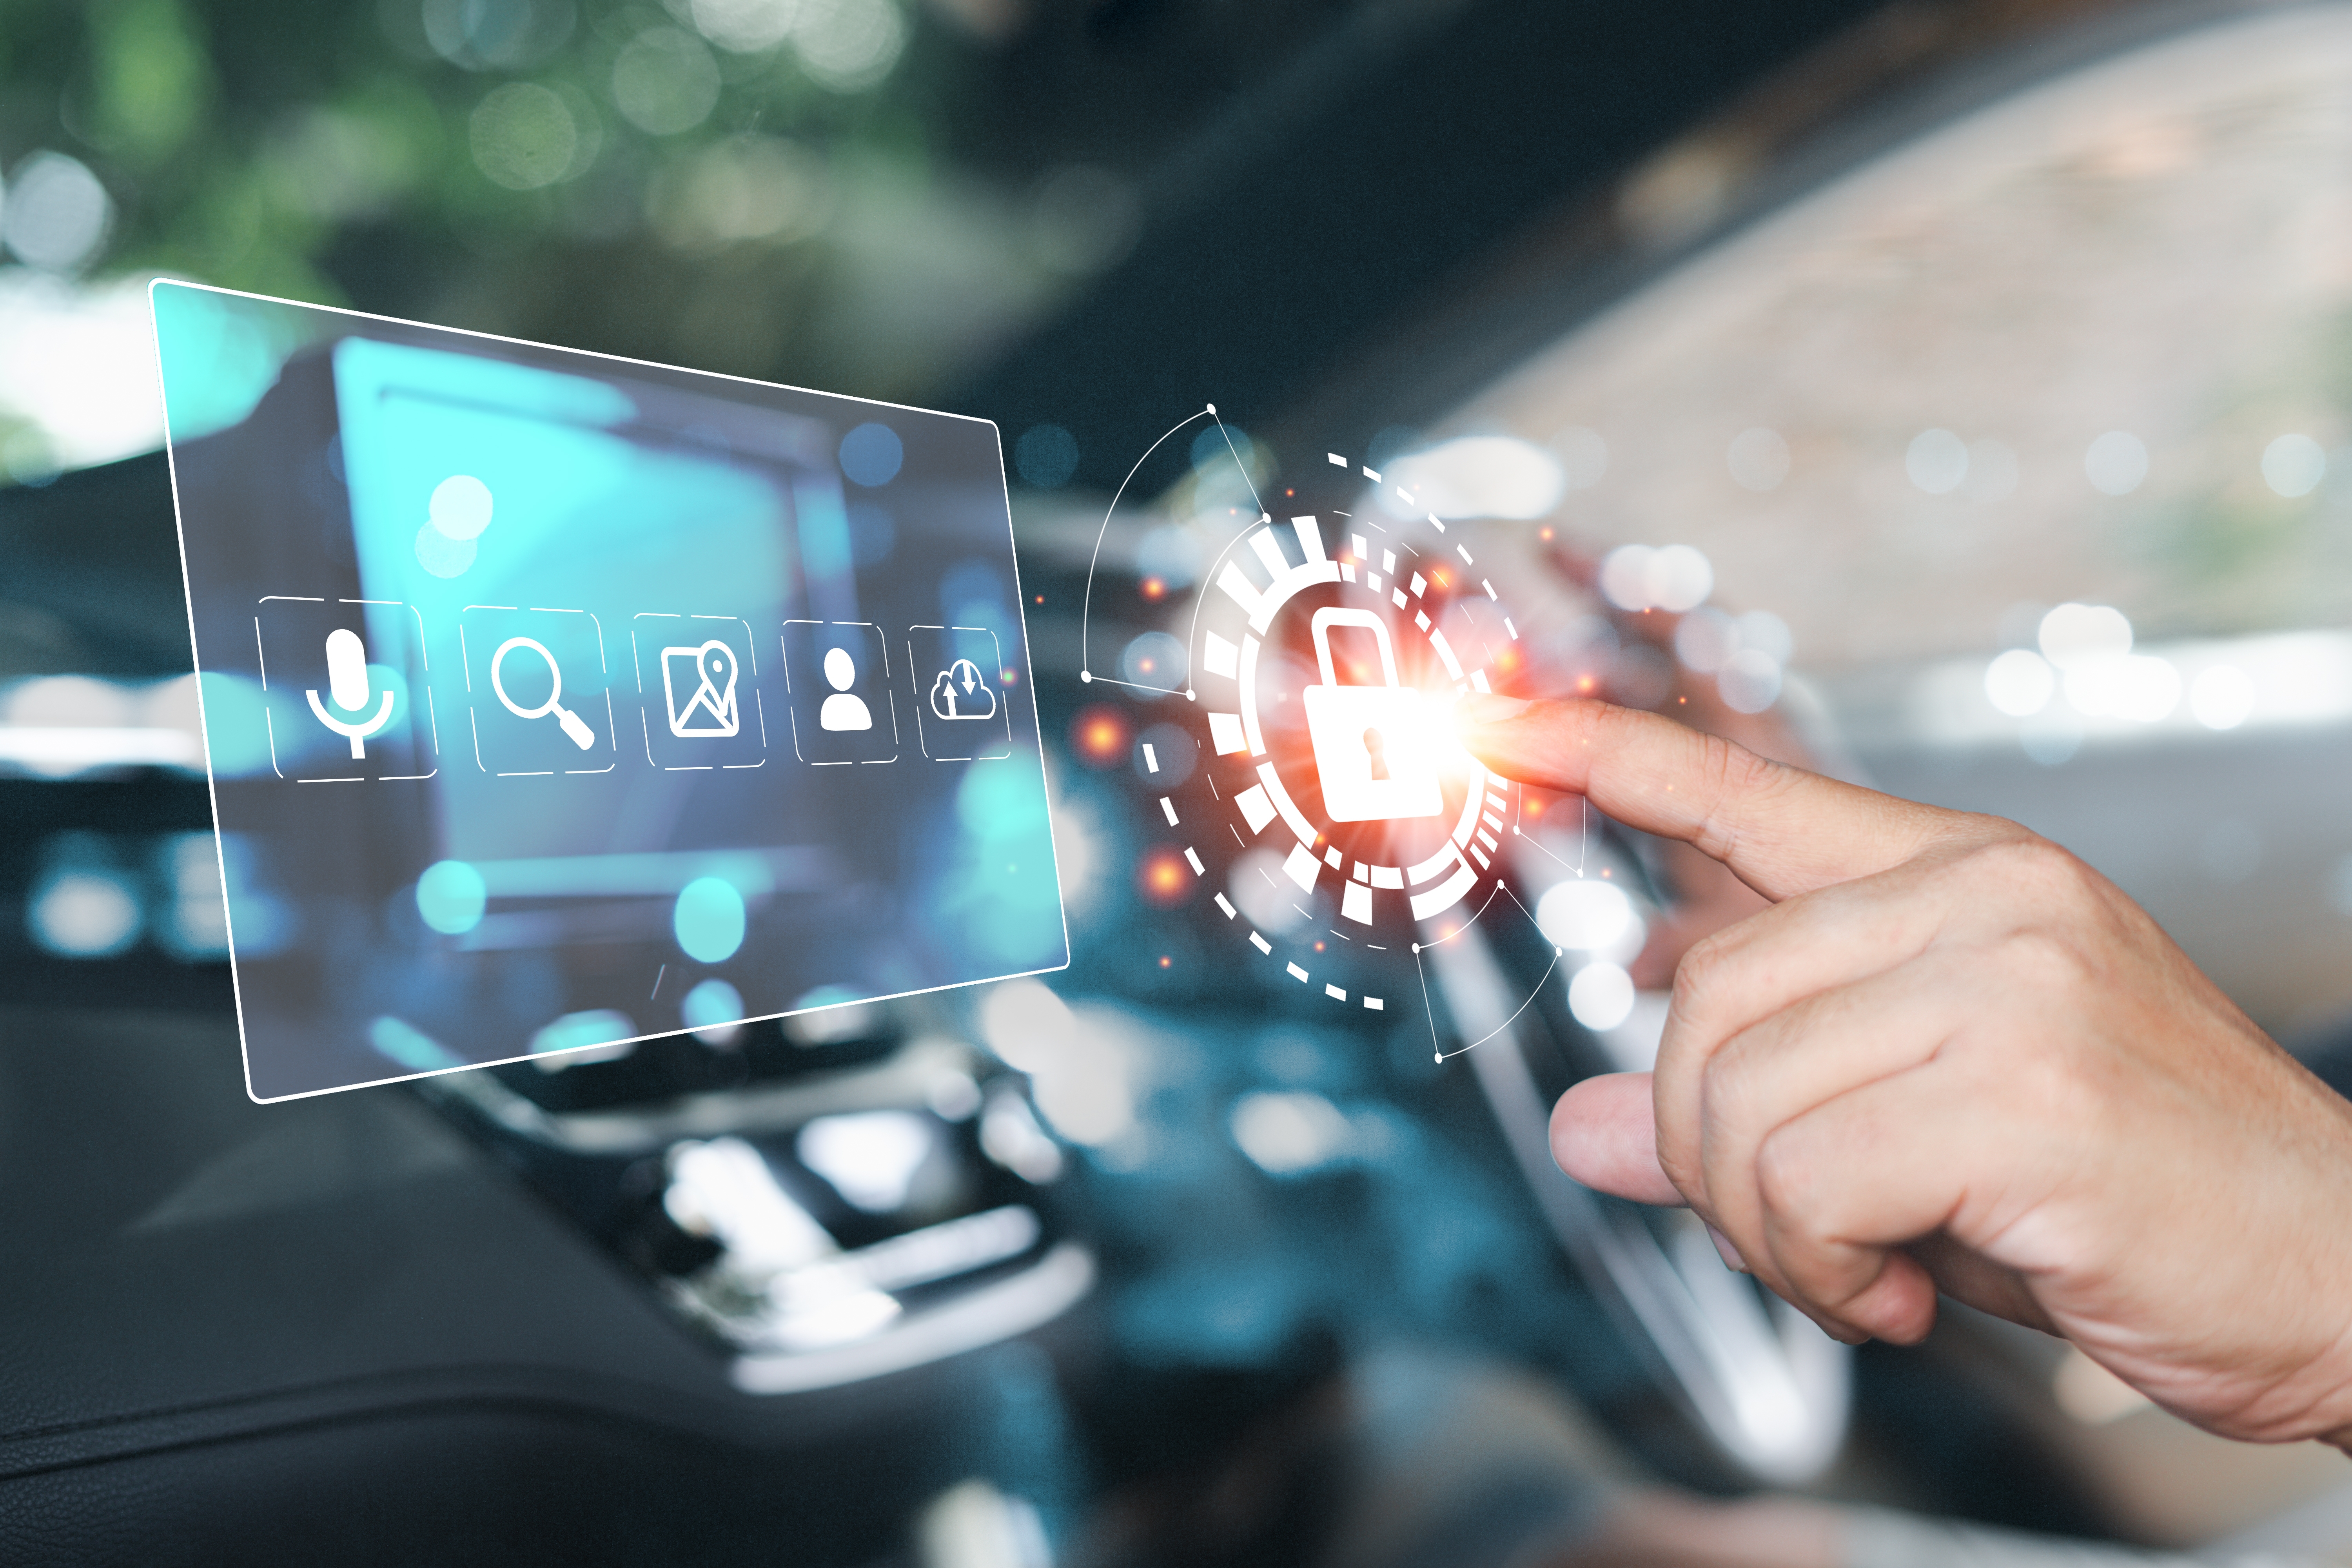 Automotive Security in a Connected World